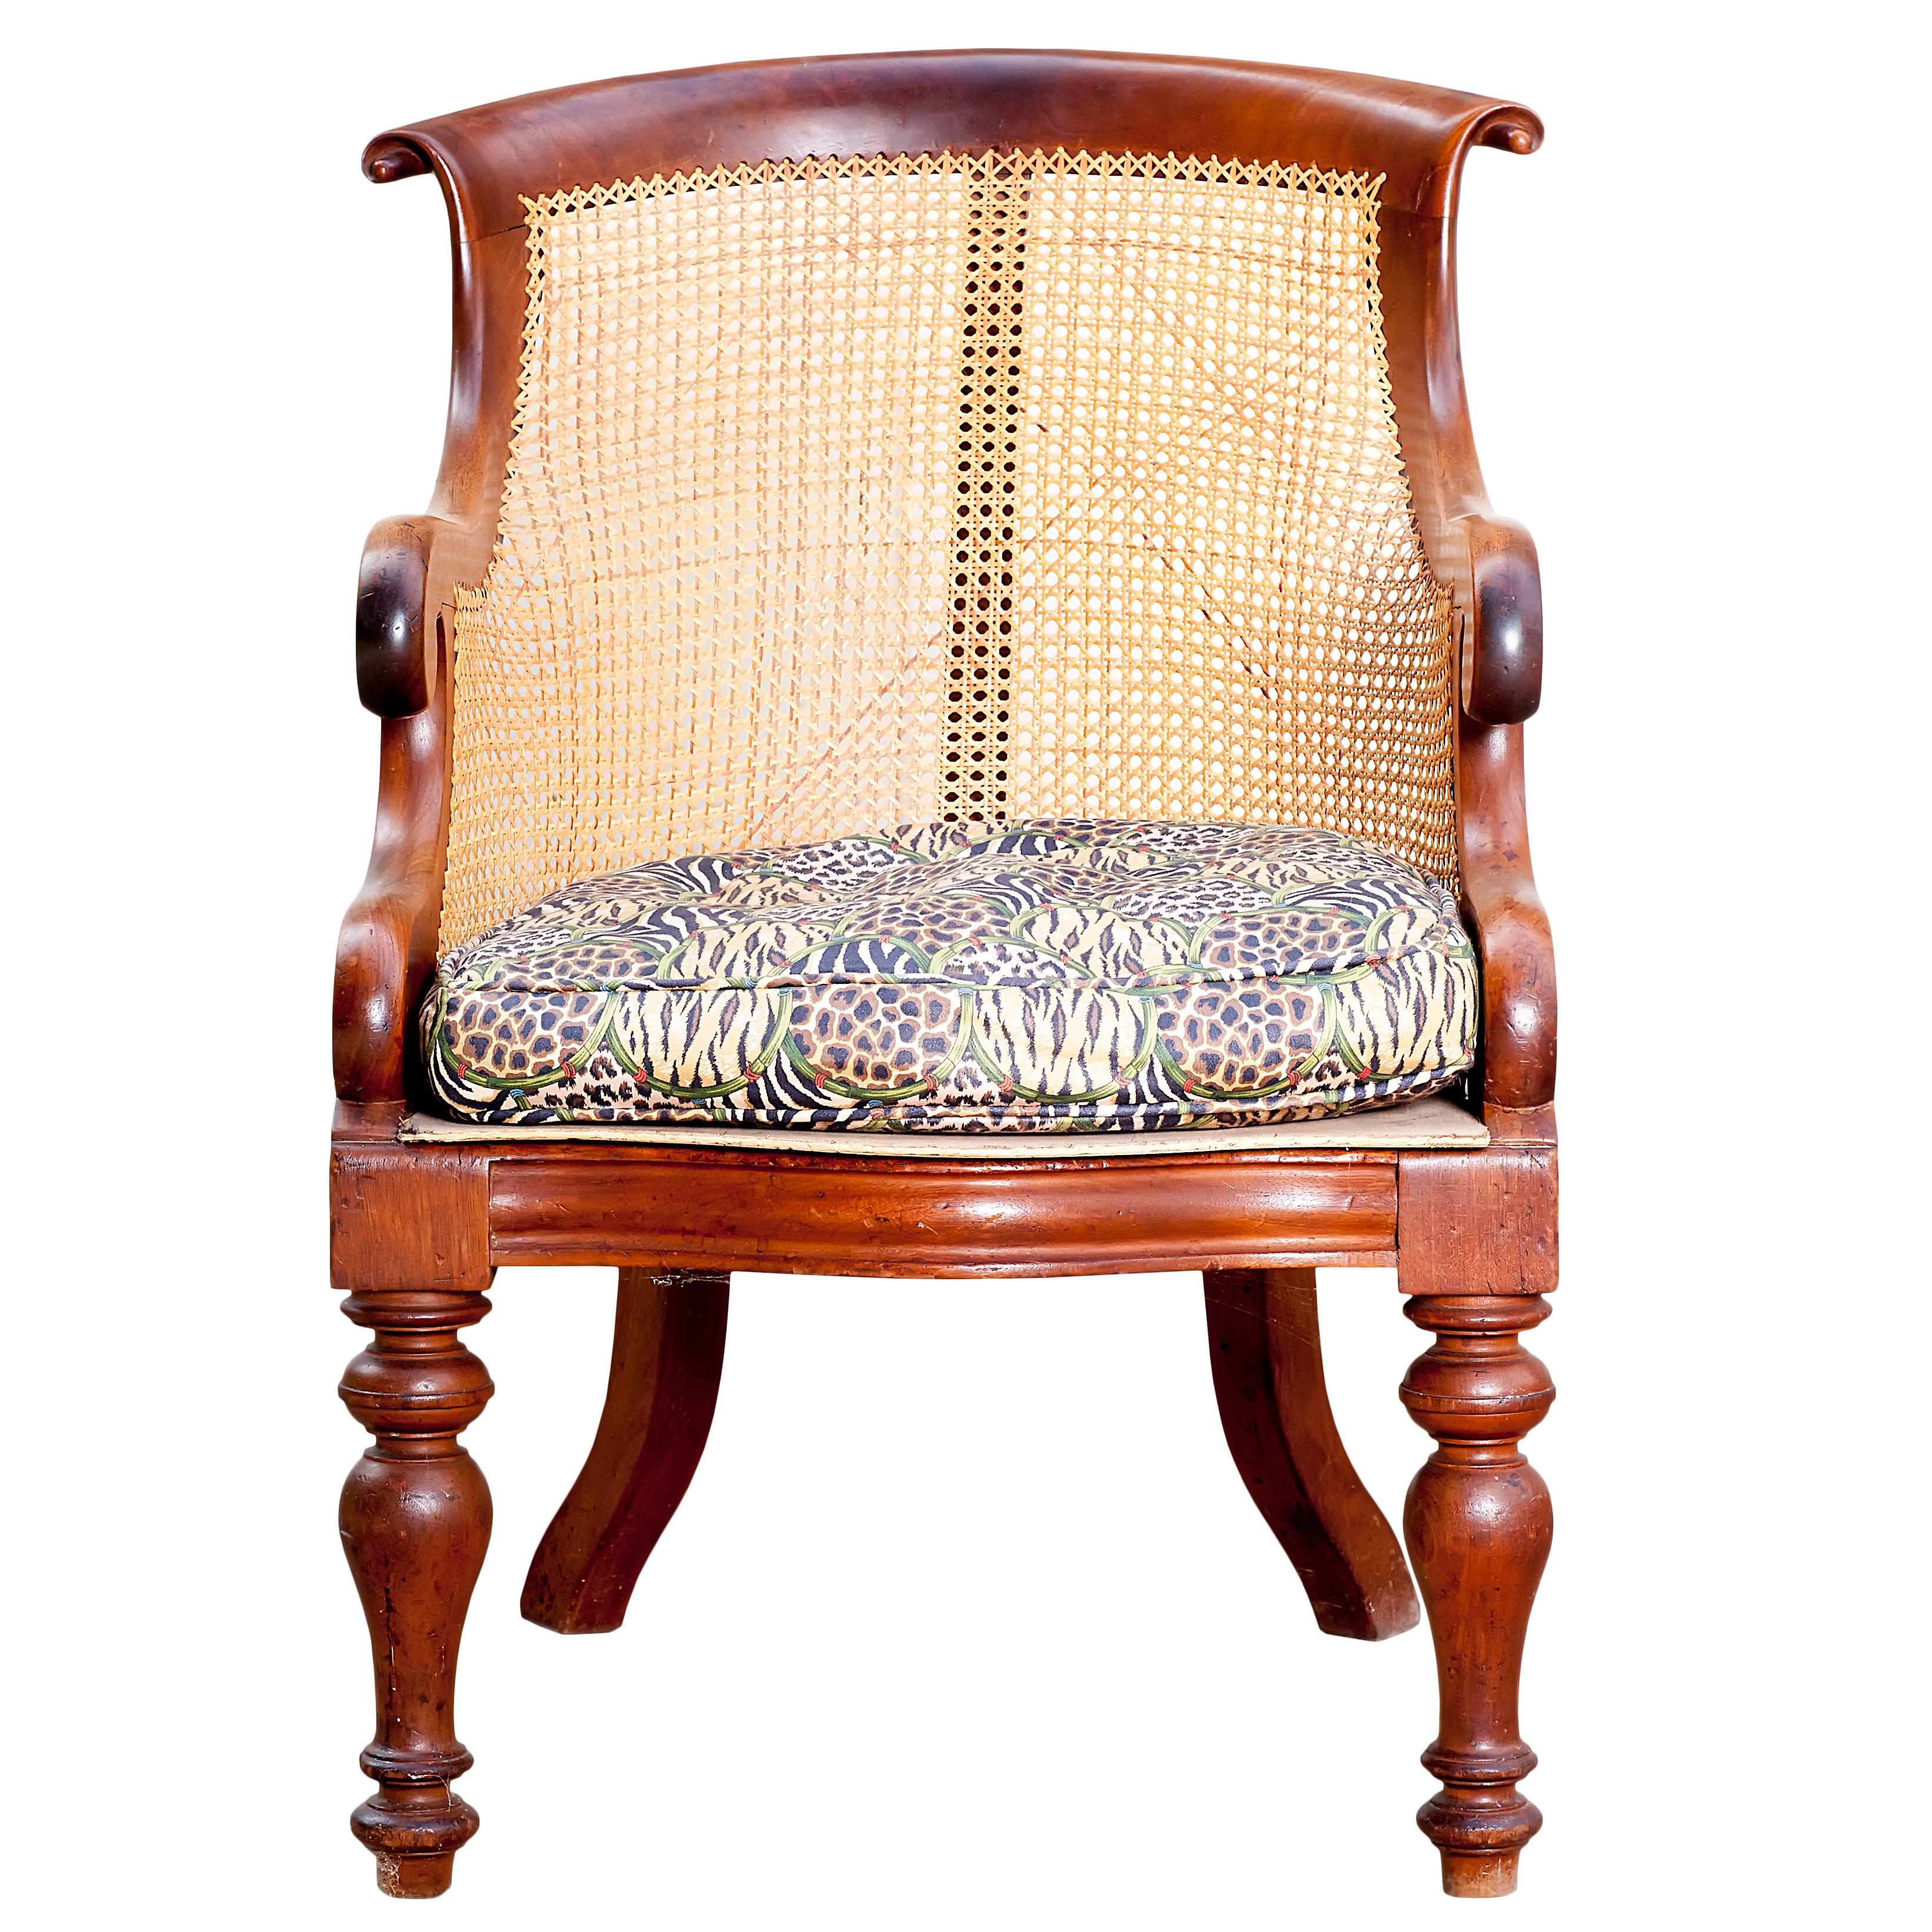 A pair of English Mahogany Antique Caned Chairs